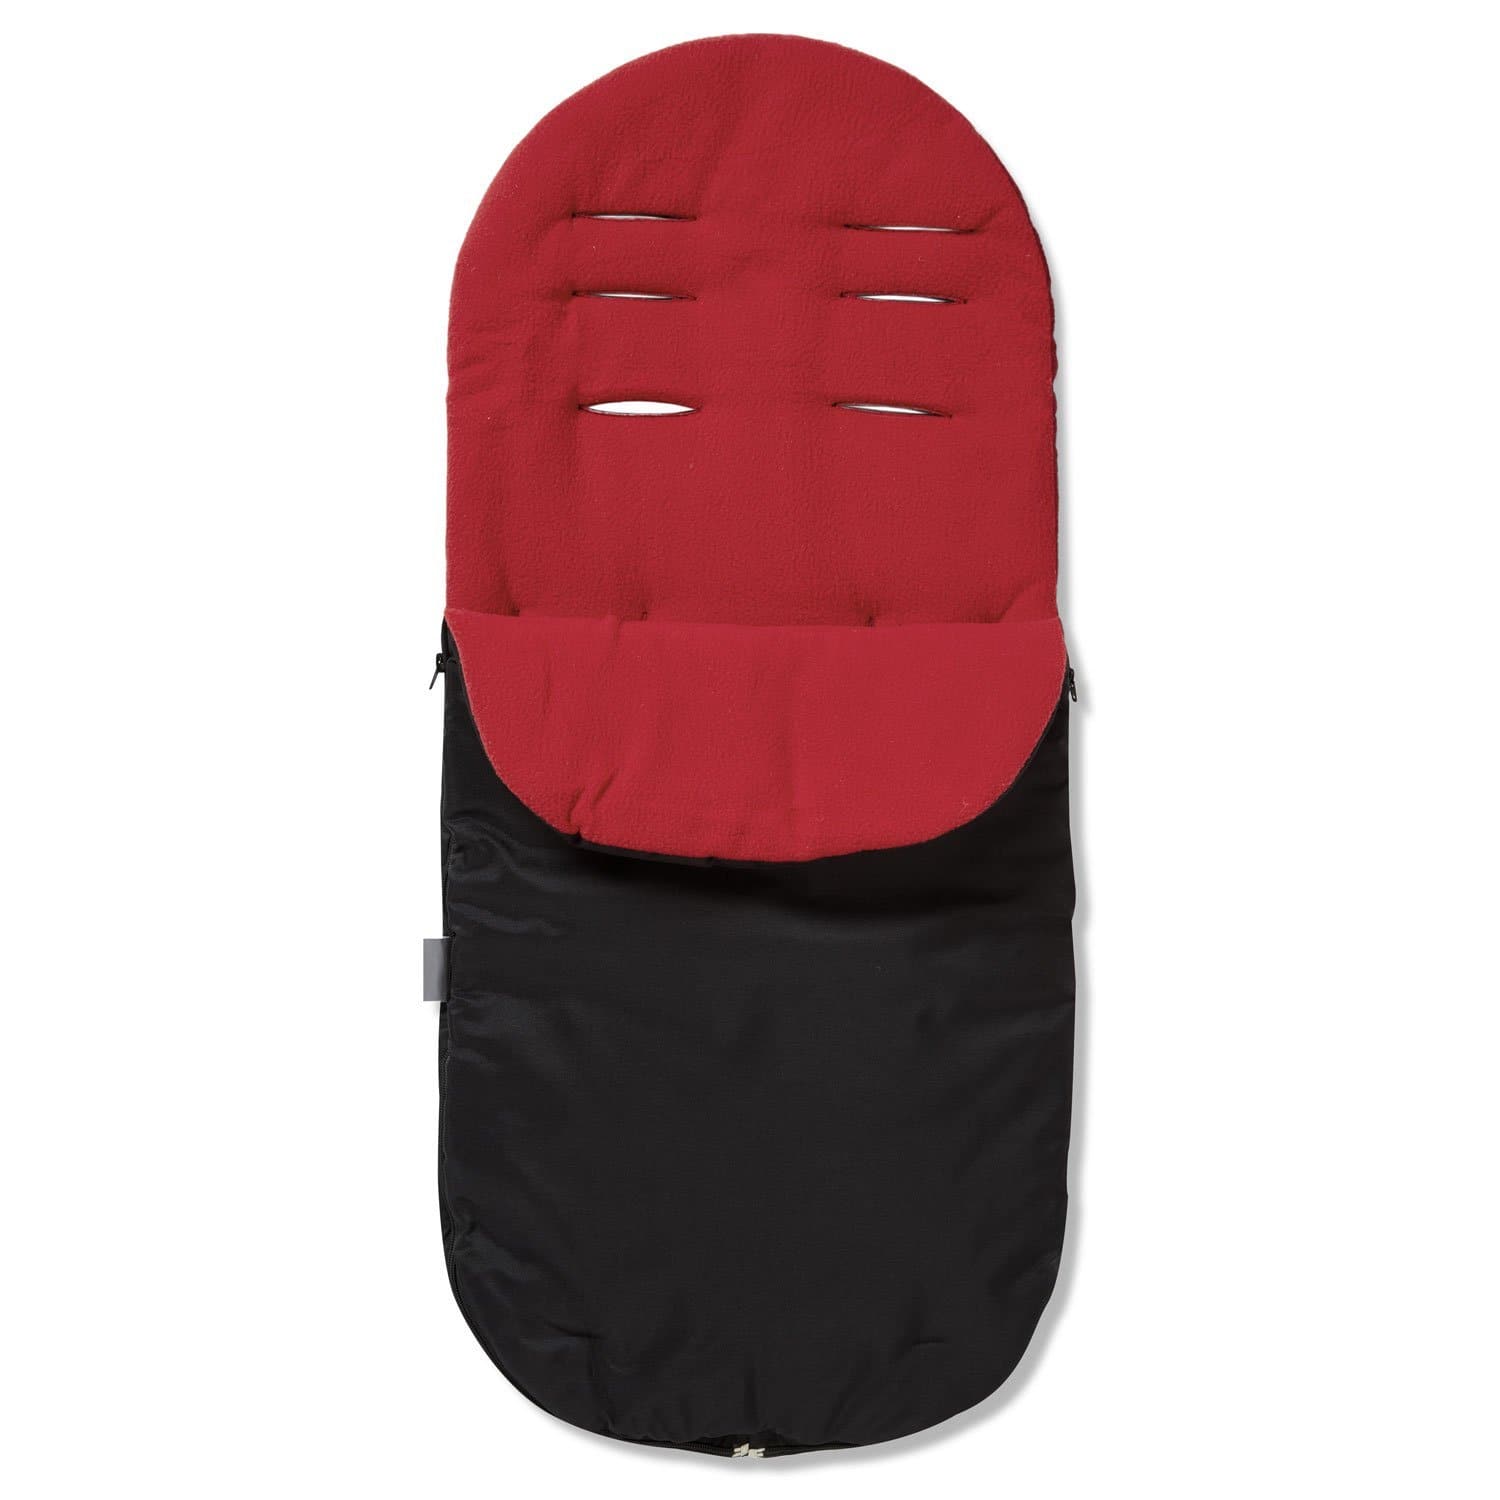 Footmuff / Cosy Toes Compatible with Kiddy - Red / Fits All Models | For Your Little One